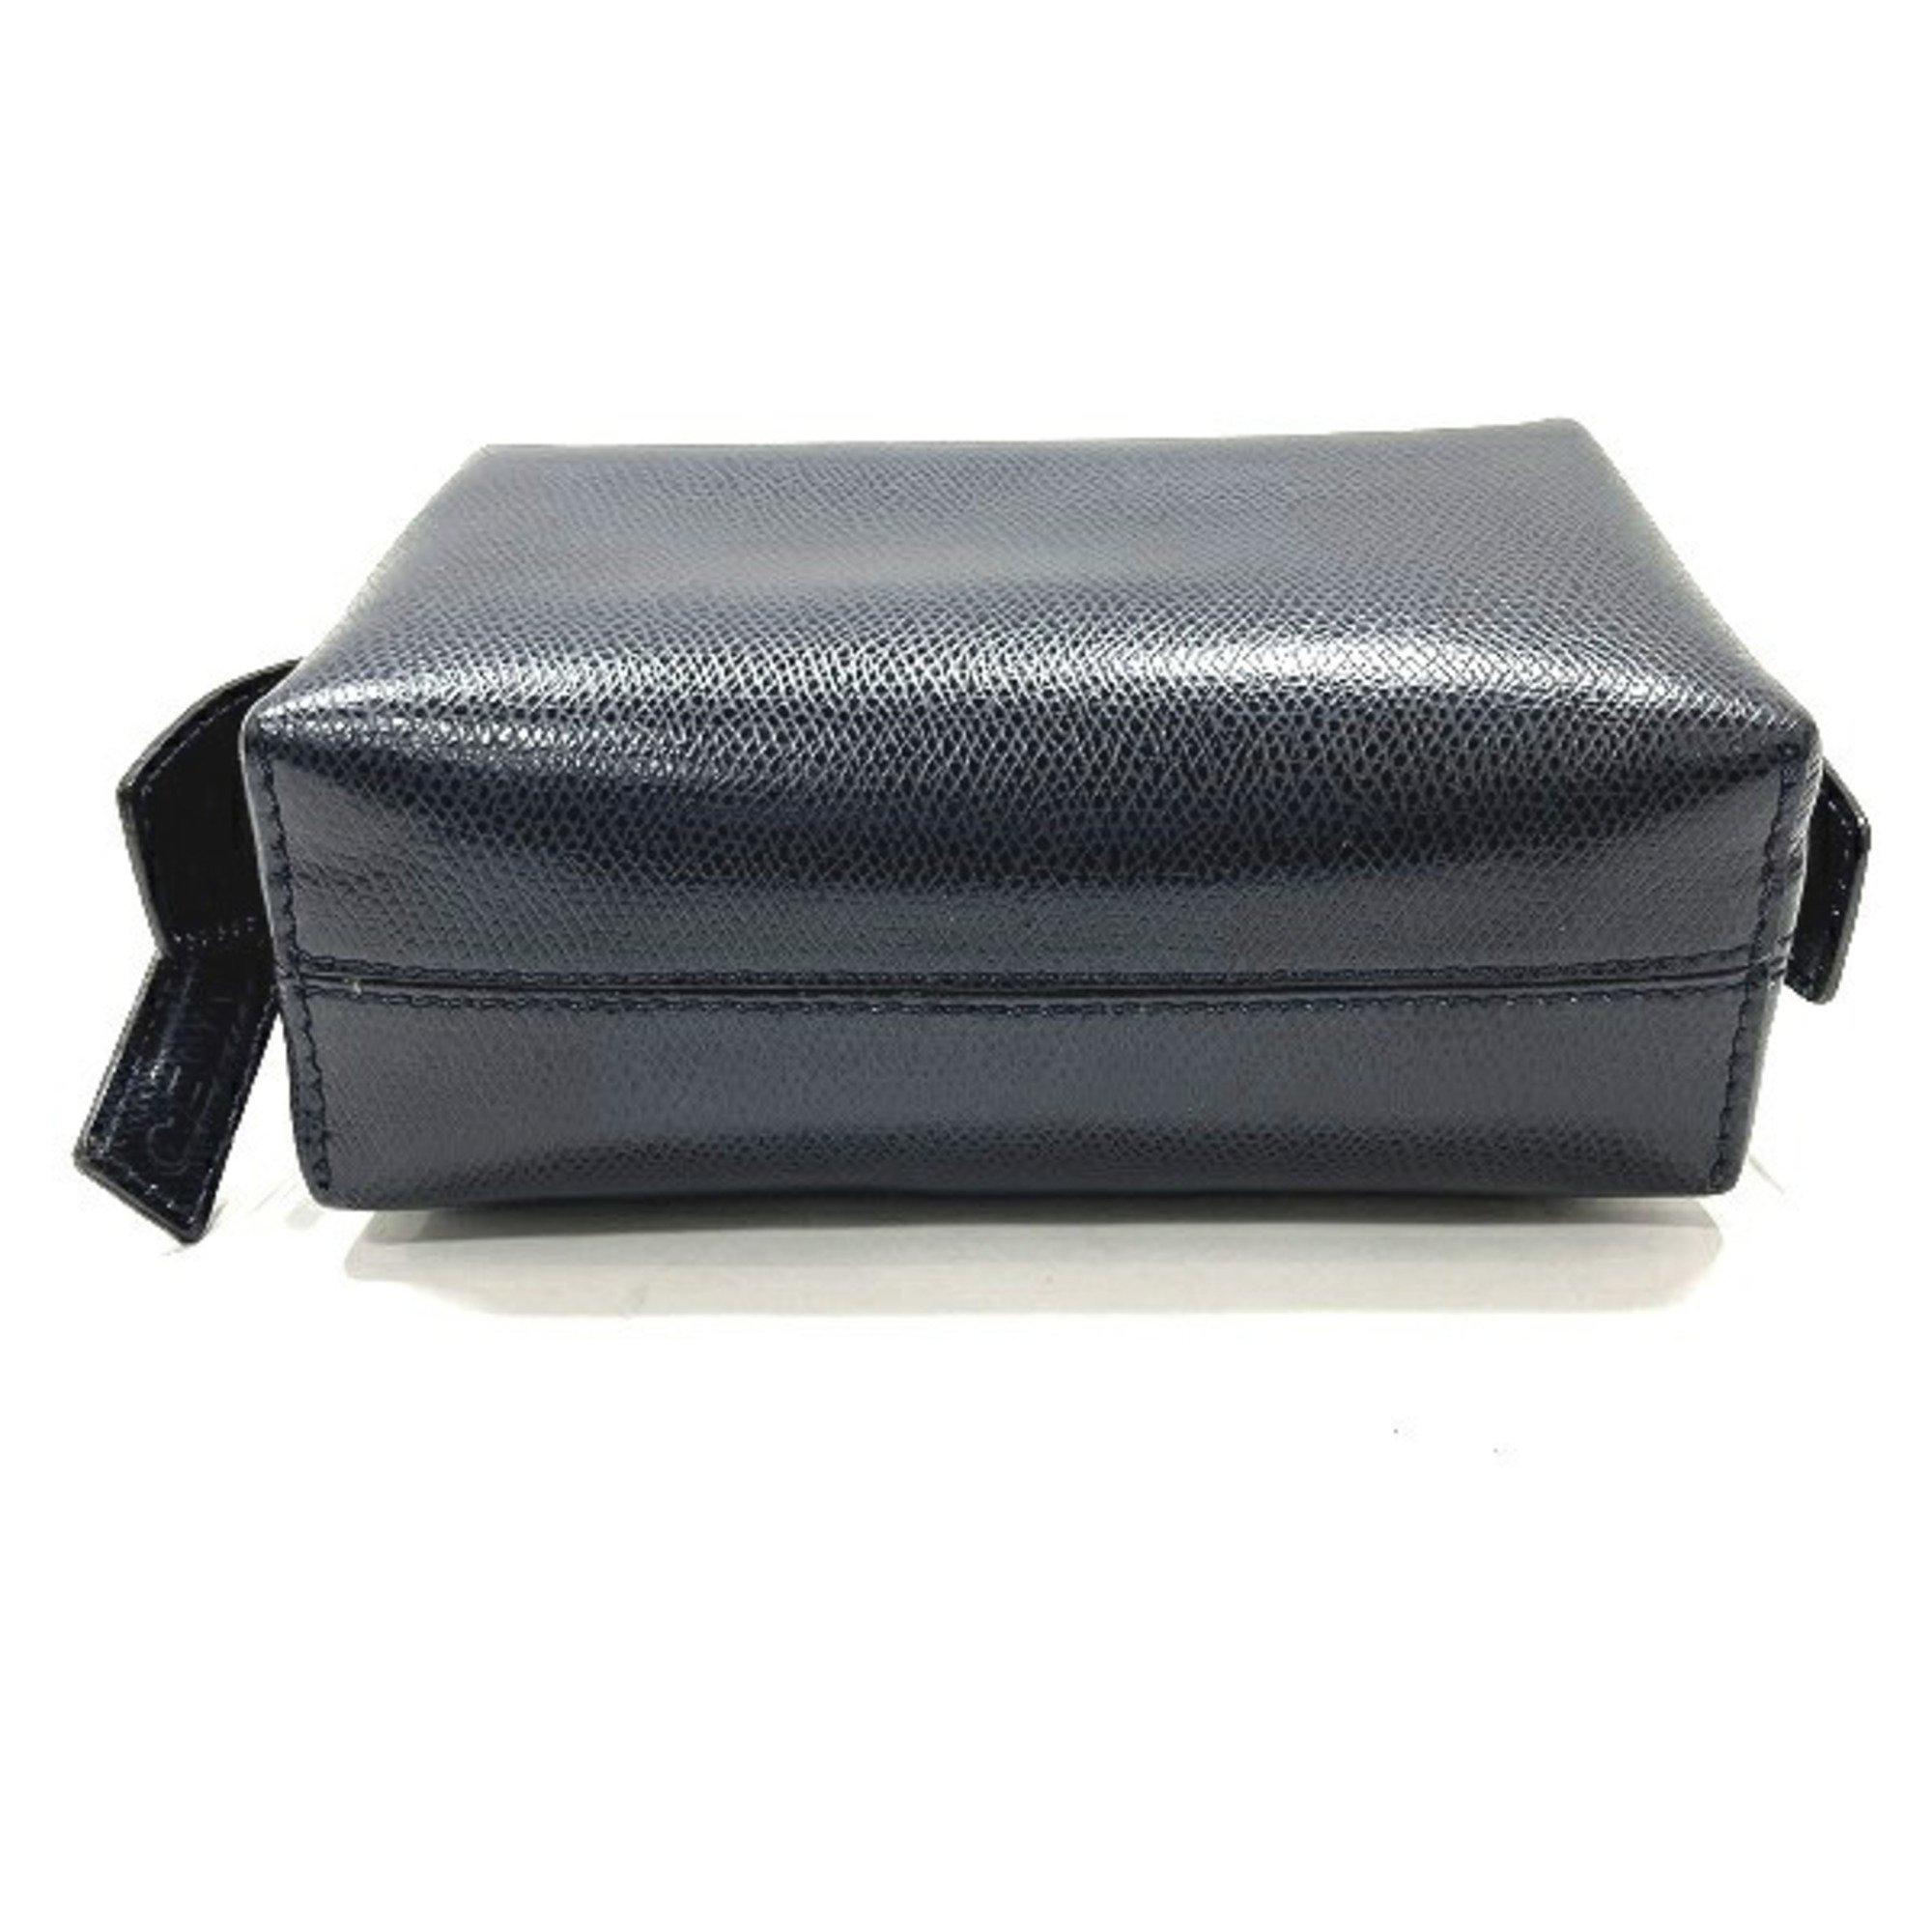 CELINE Leather Navy Brand Accessories Pouch Women's Bag